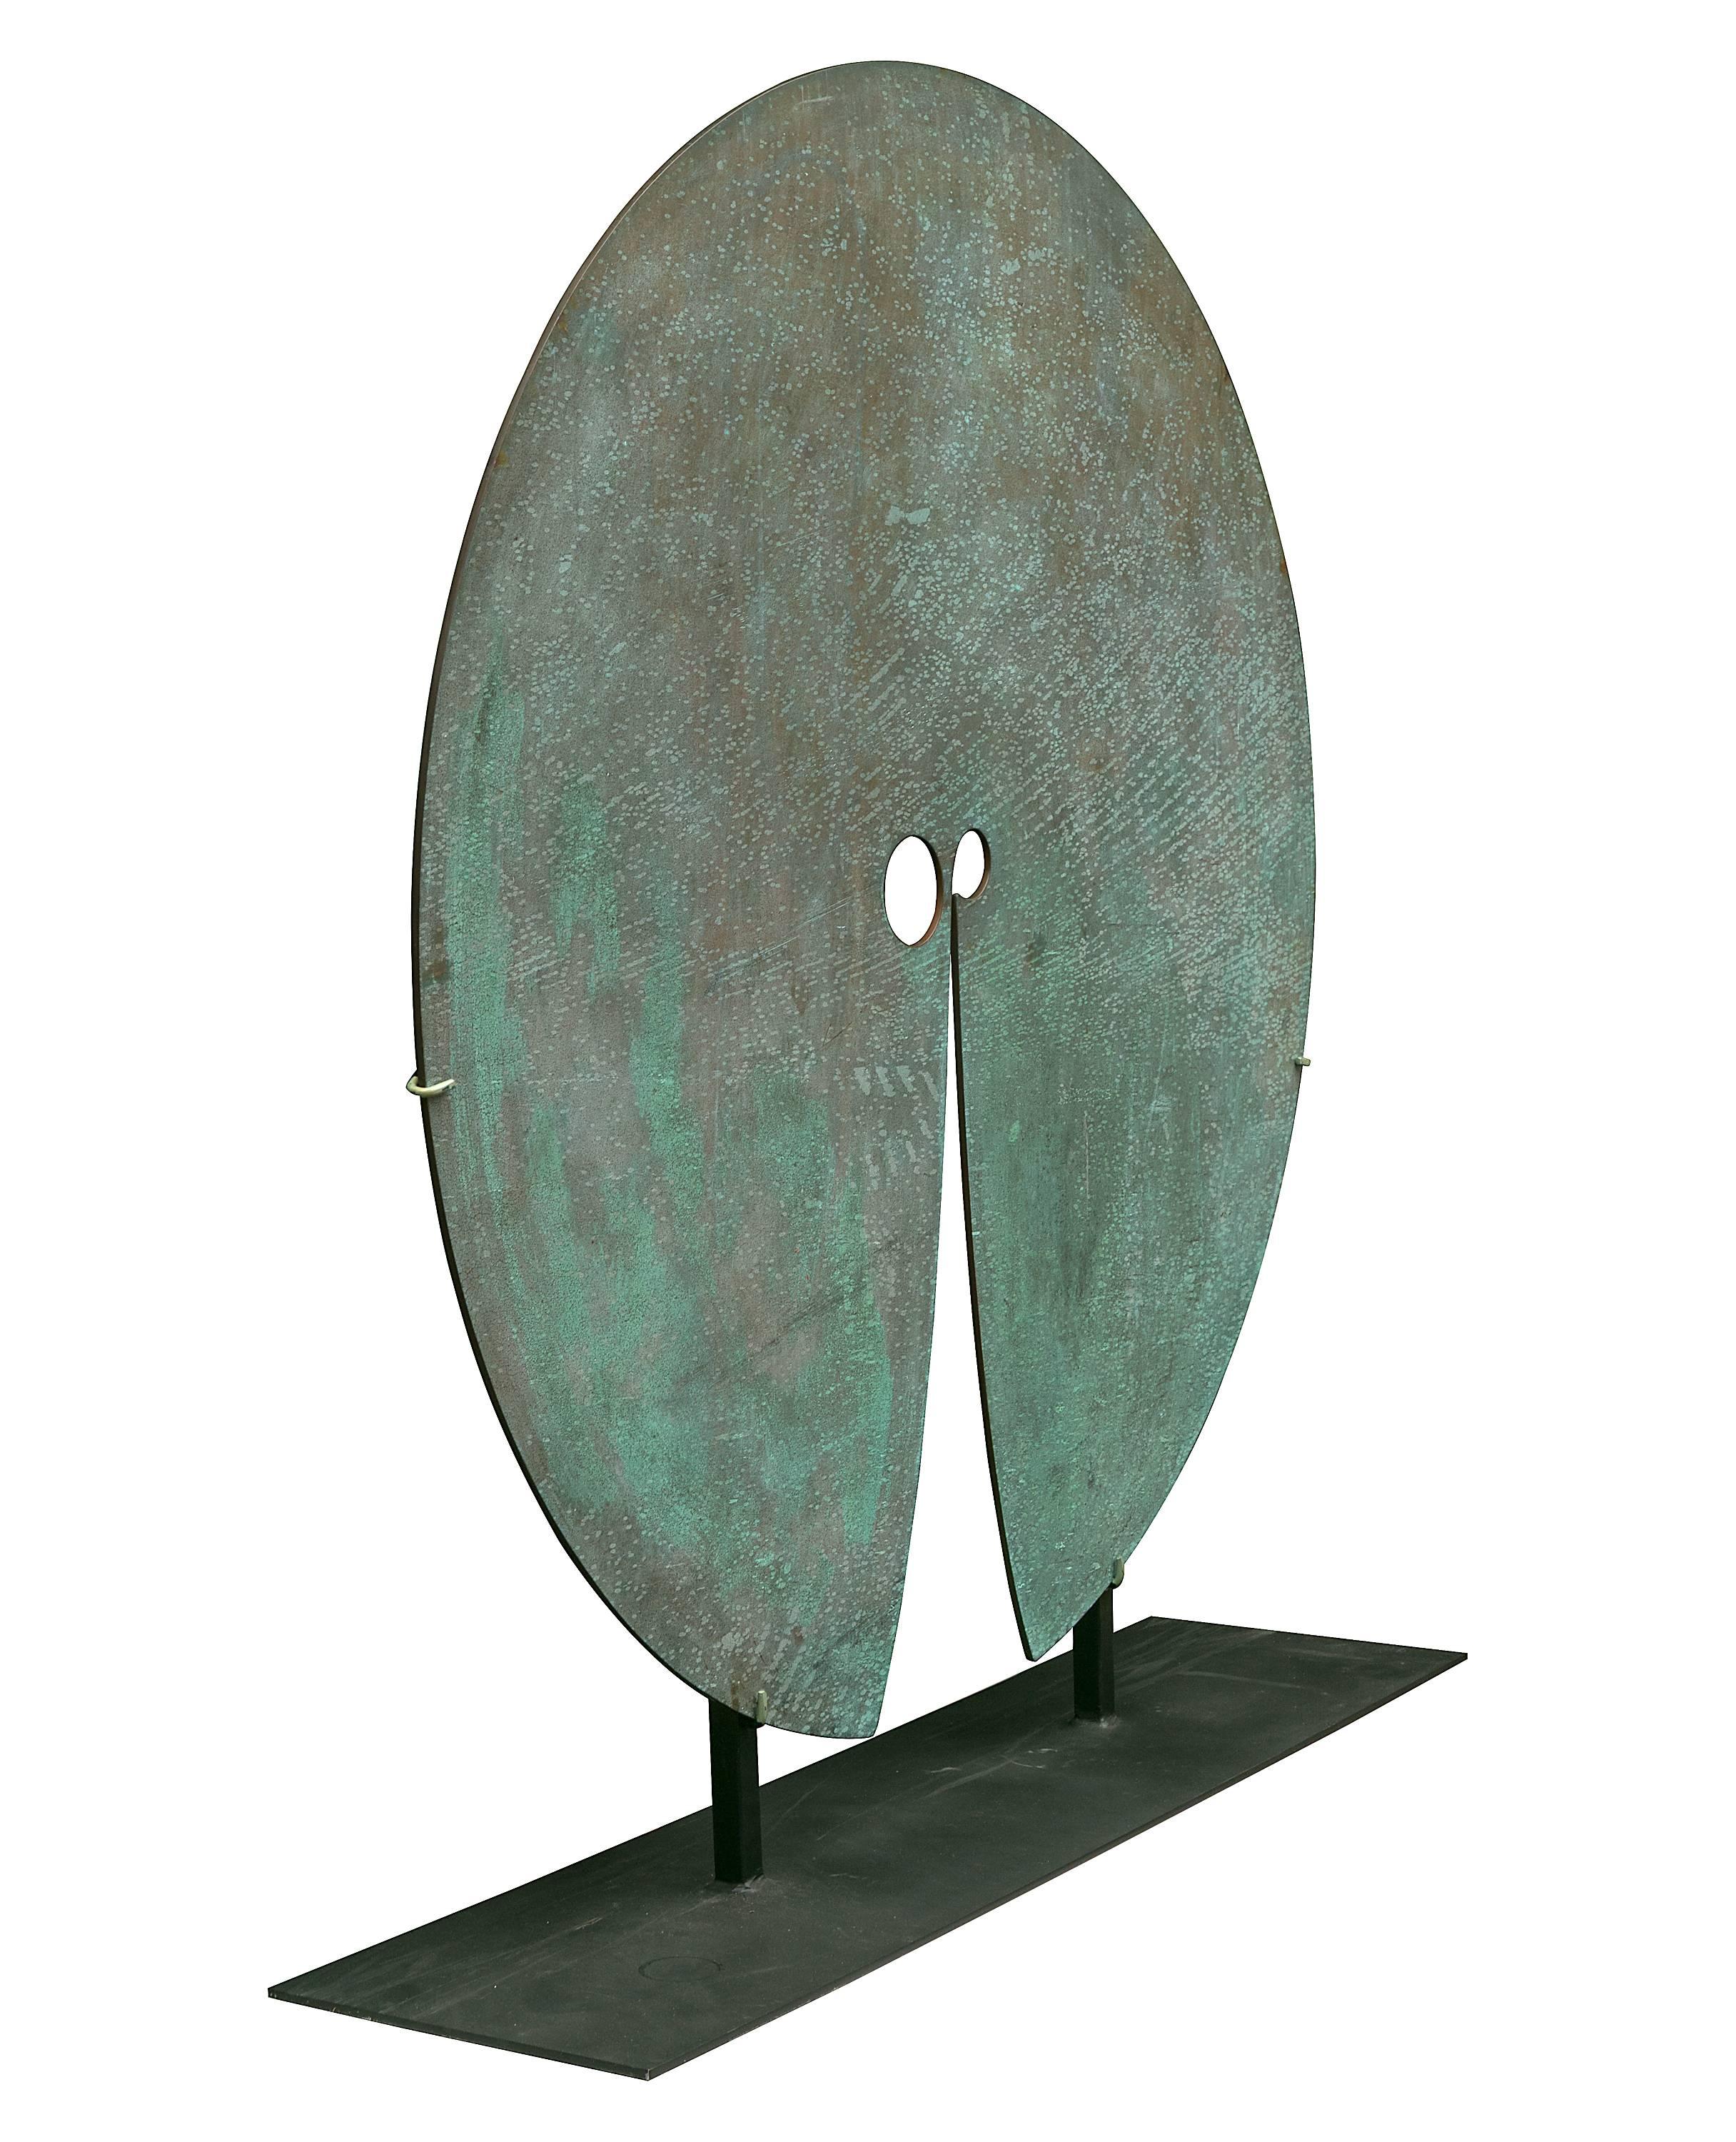 This large scale work measures 4' in diameter with gracefully arcing cuts creating divergent planes from the nearly unbroken circle. It is mounted in a stand for display purposes but when hung properly can also be sounded.